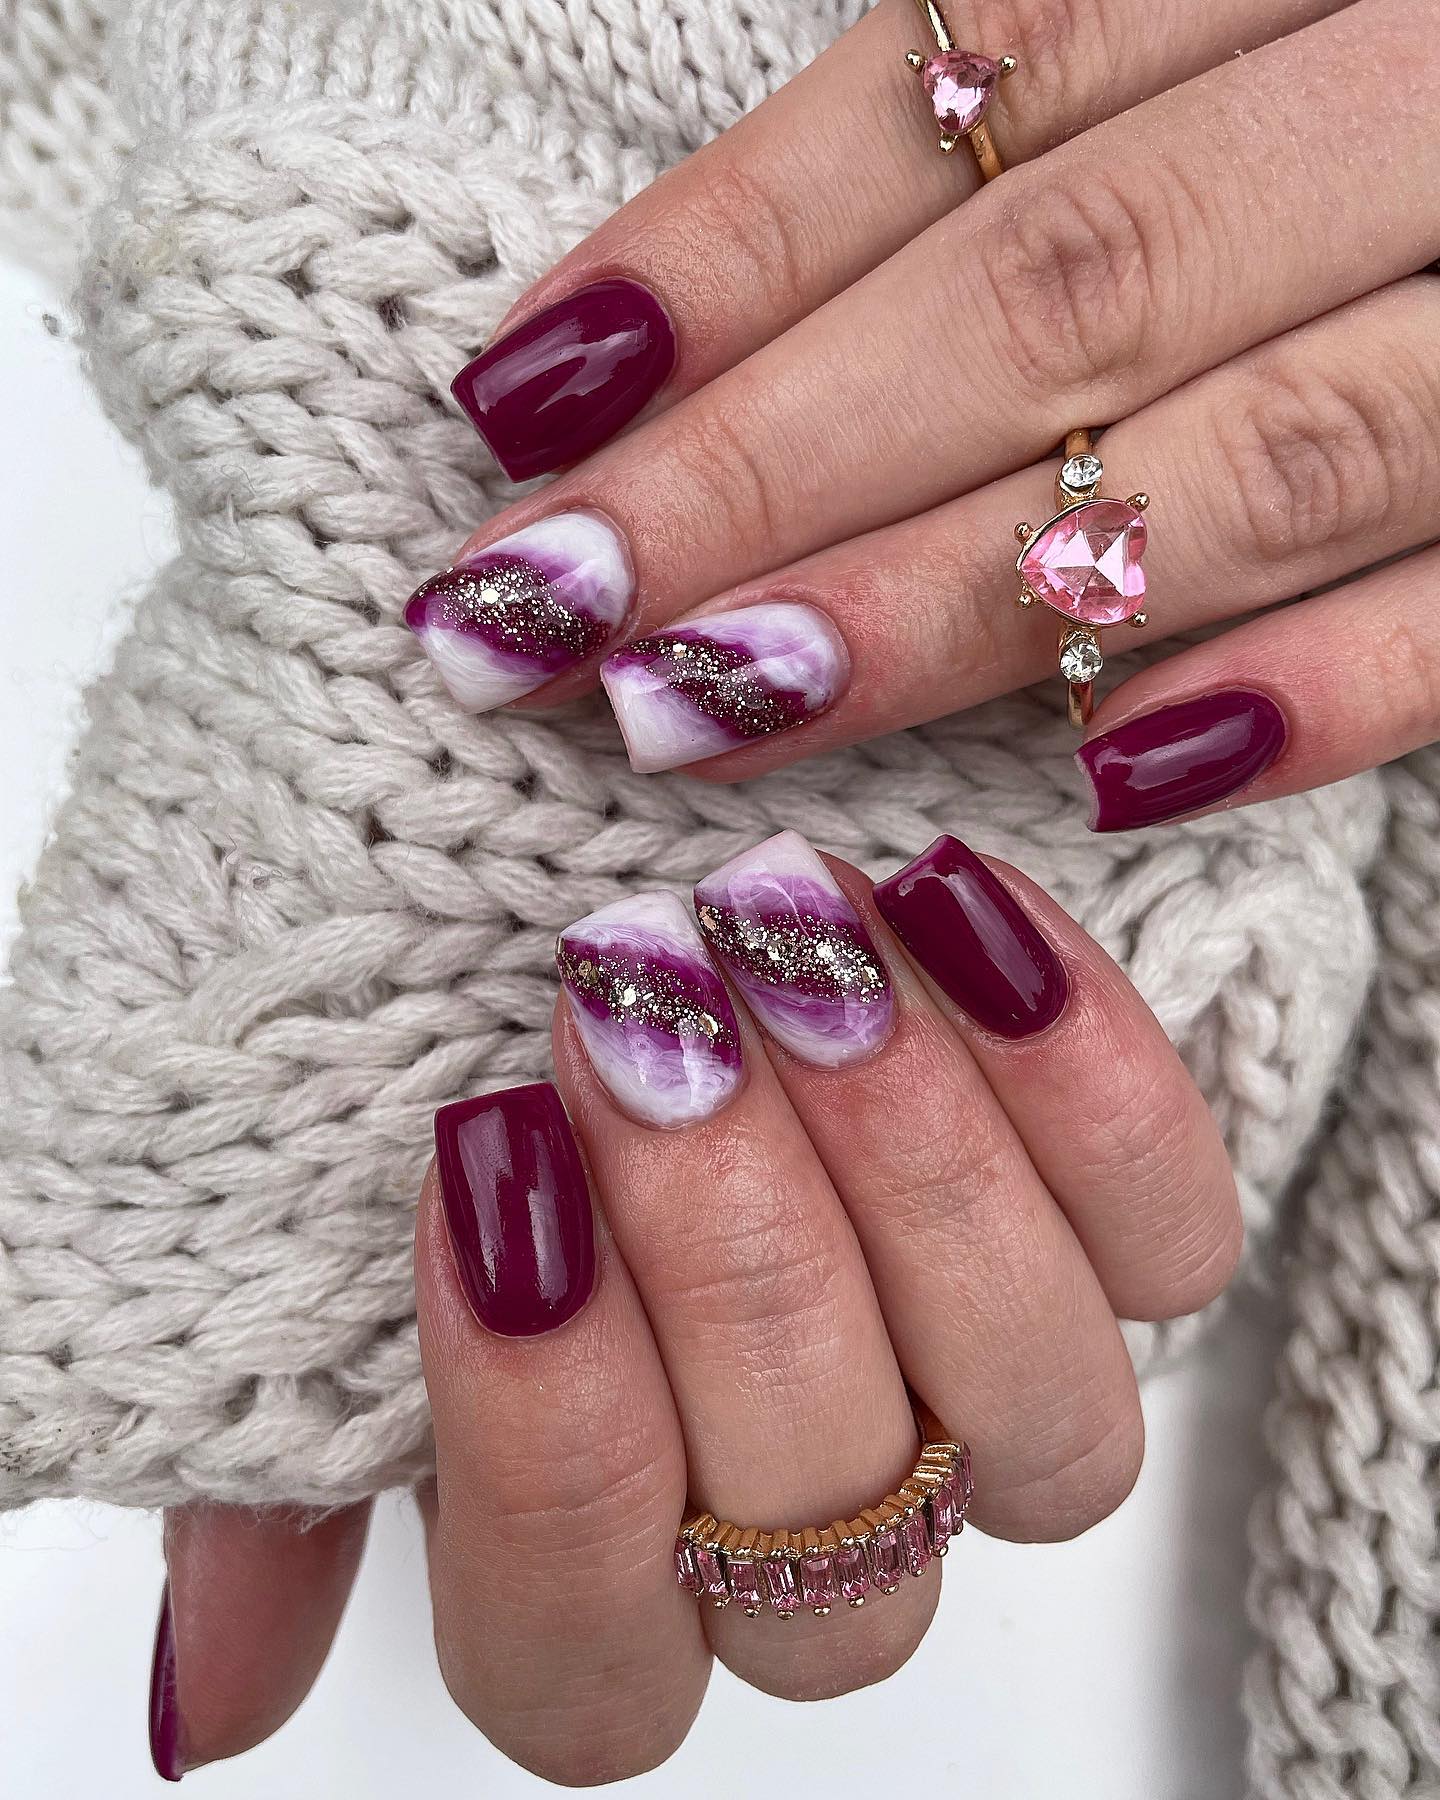 Japanese Manicure Gel Burgundy Nail Color Set 12ml Glitter Pull Line Hooks  For Painted Nails And Art Designs 231020 From Bao04, $24.75 | DHgate.Com